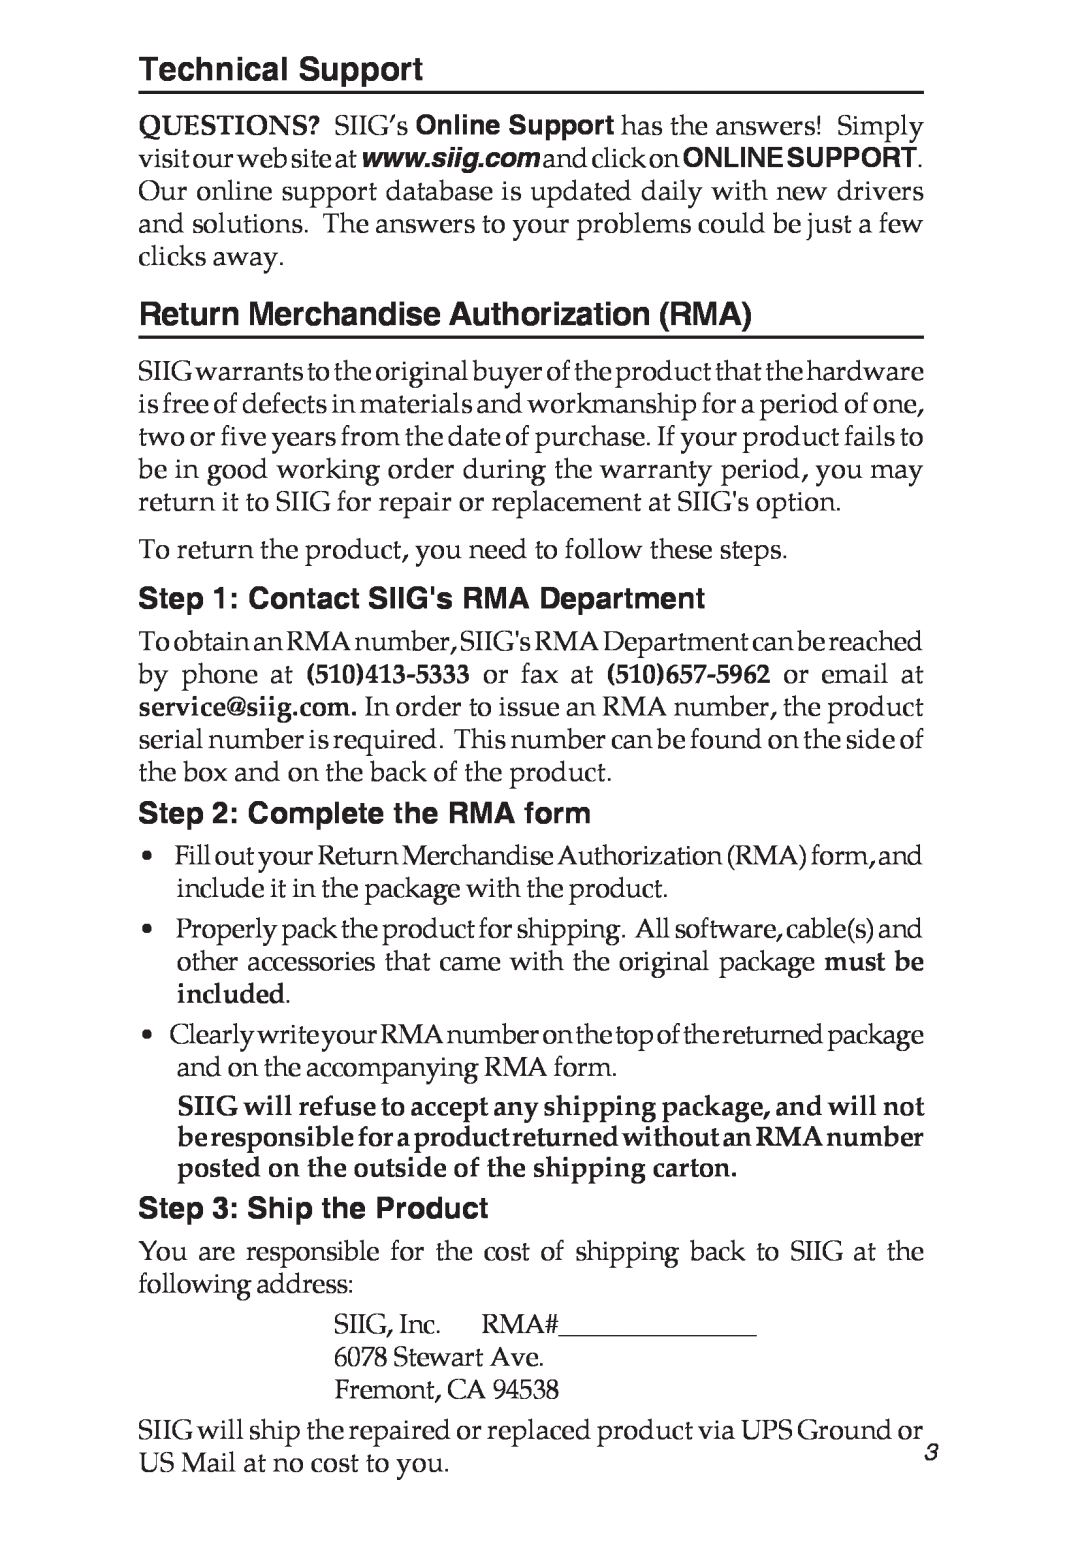 SIIG 04-0192A Technical Support, Return Merchandise Authorization RMA, Contact SIIGs RMA Department, Complete the RMA form 